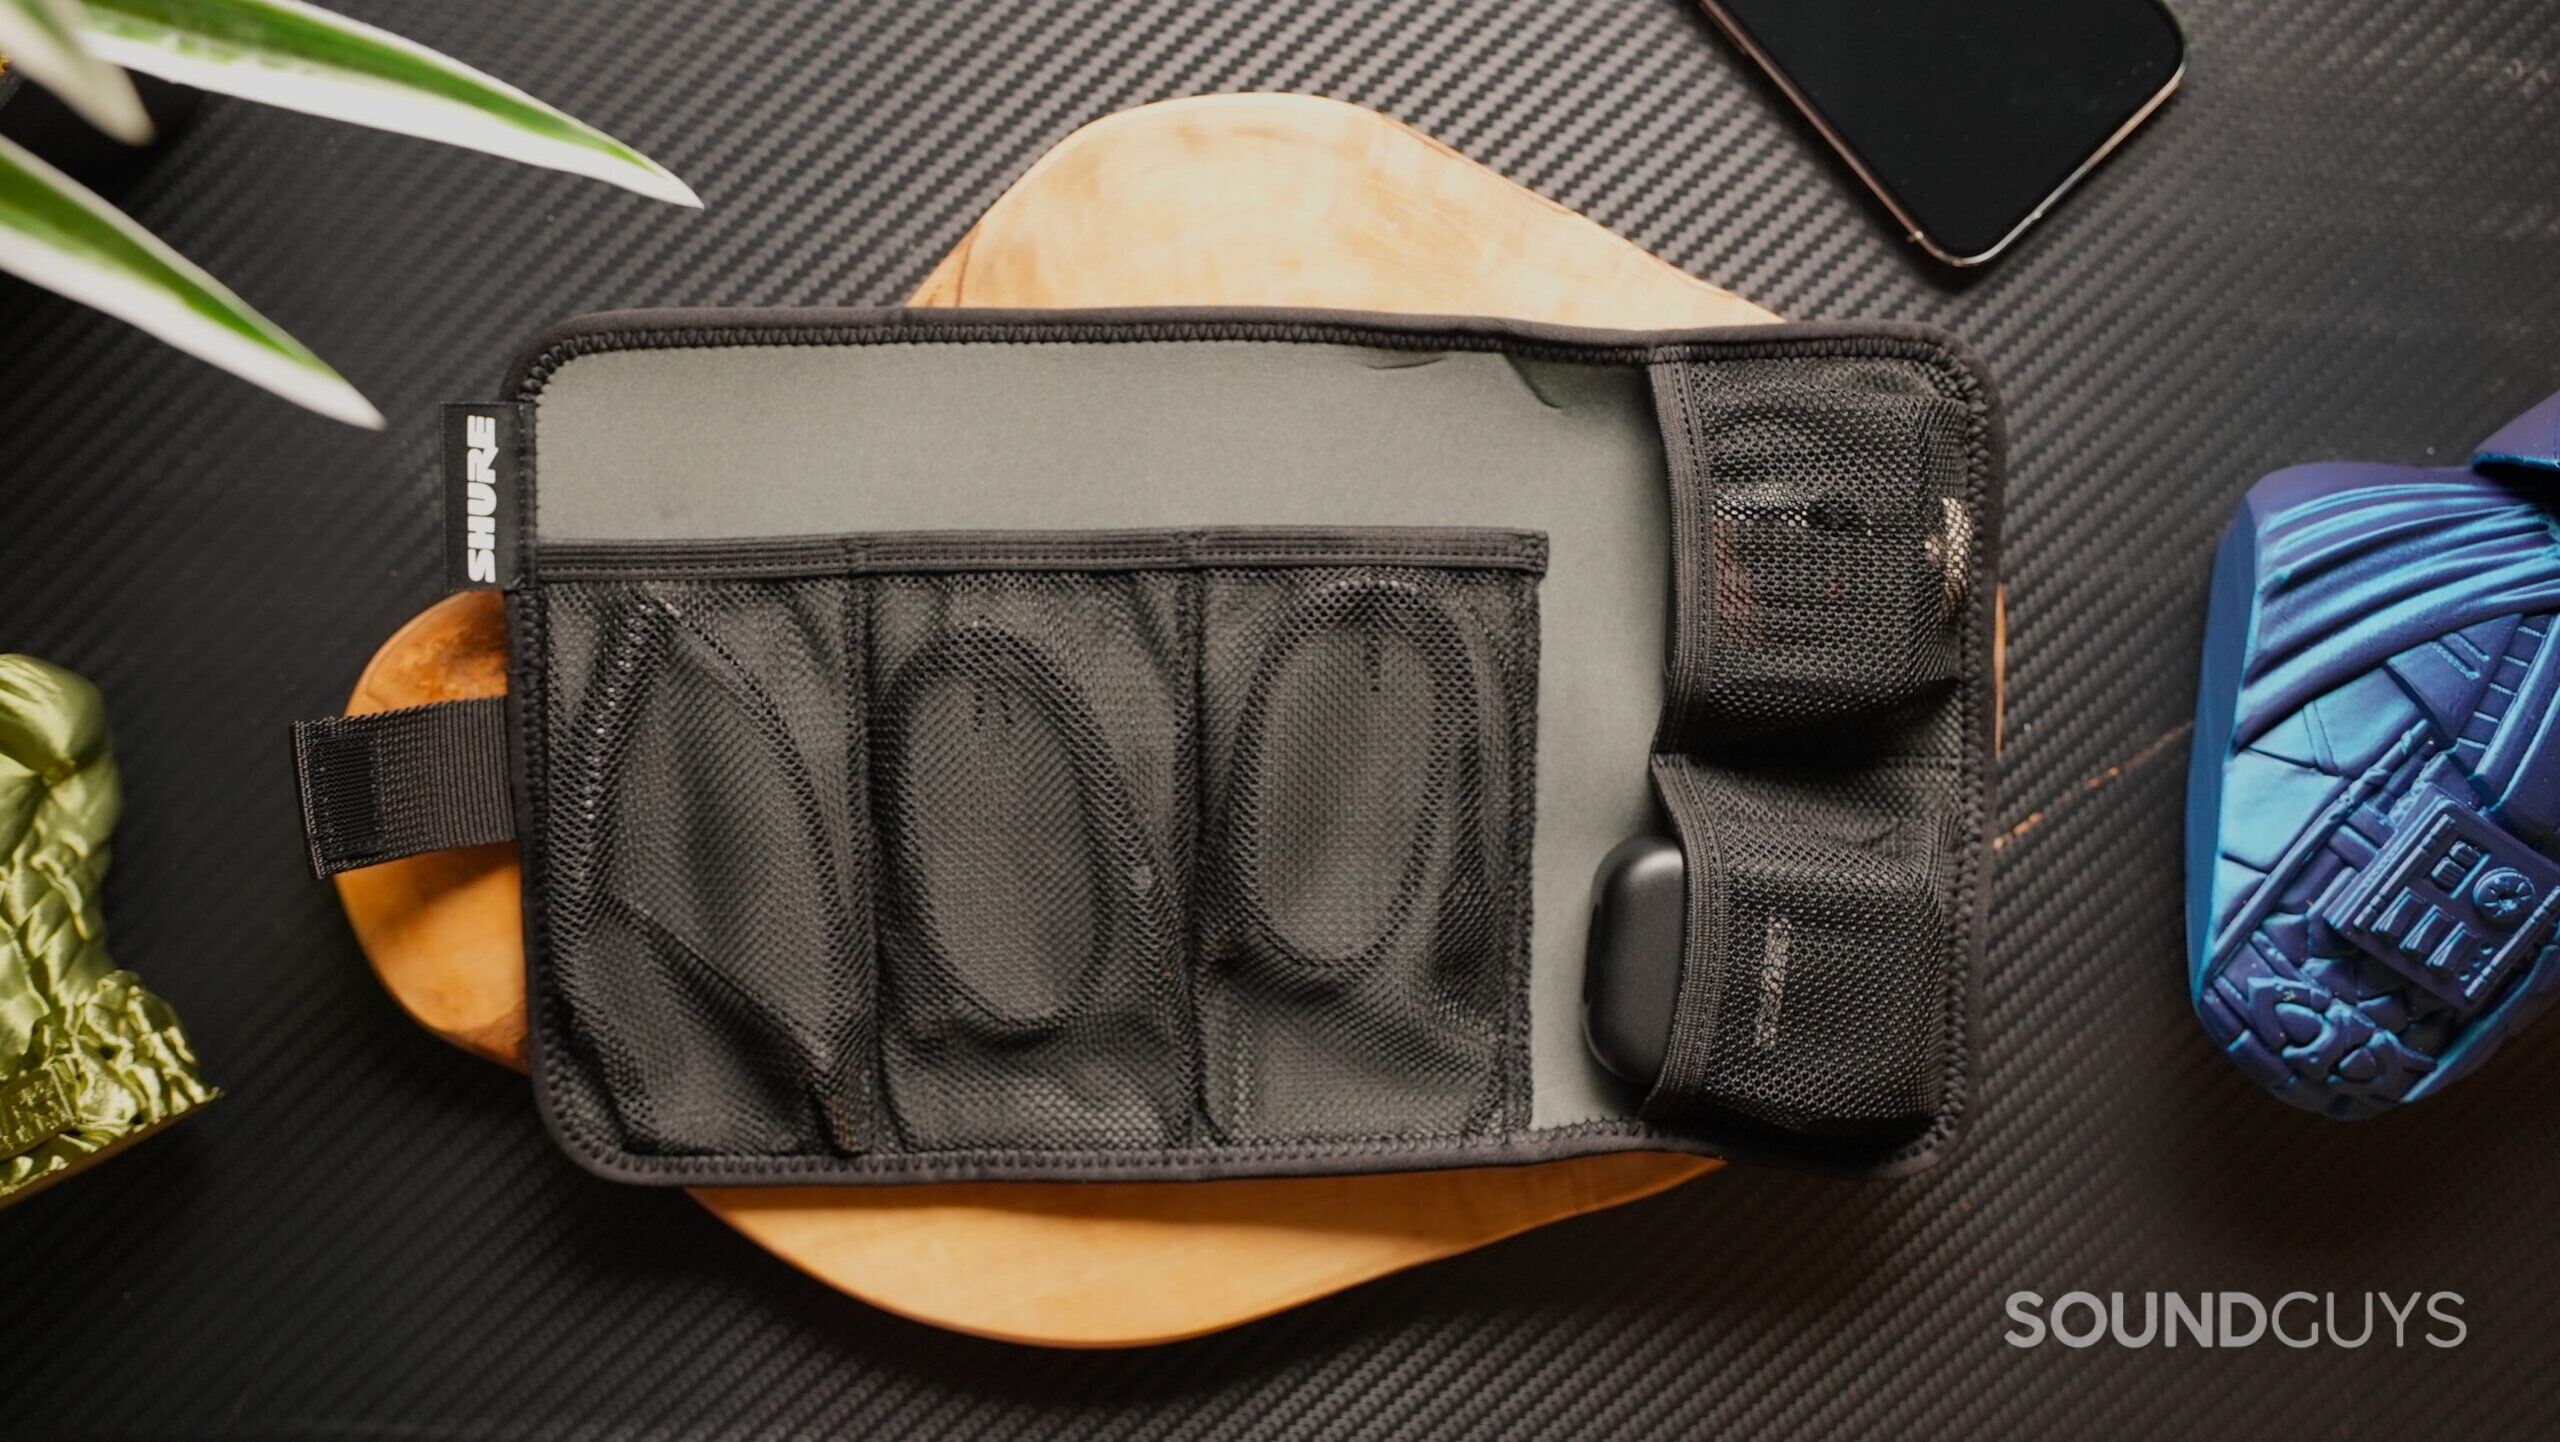 Top view of the the Shure MoveMic and it's components inside the provided carrying case